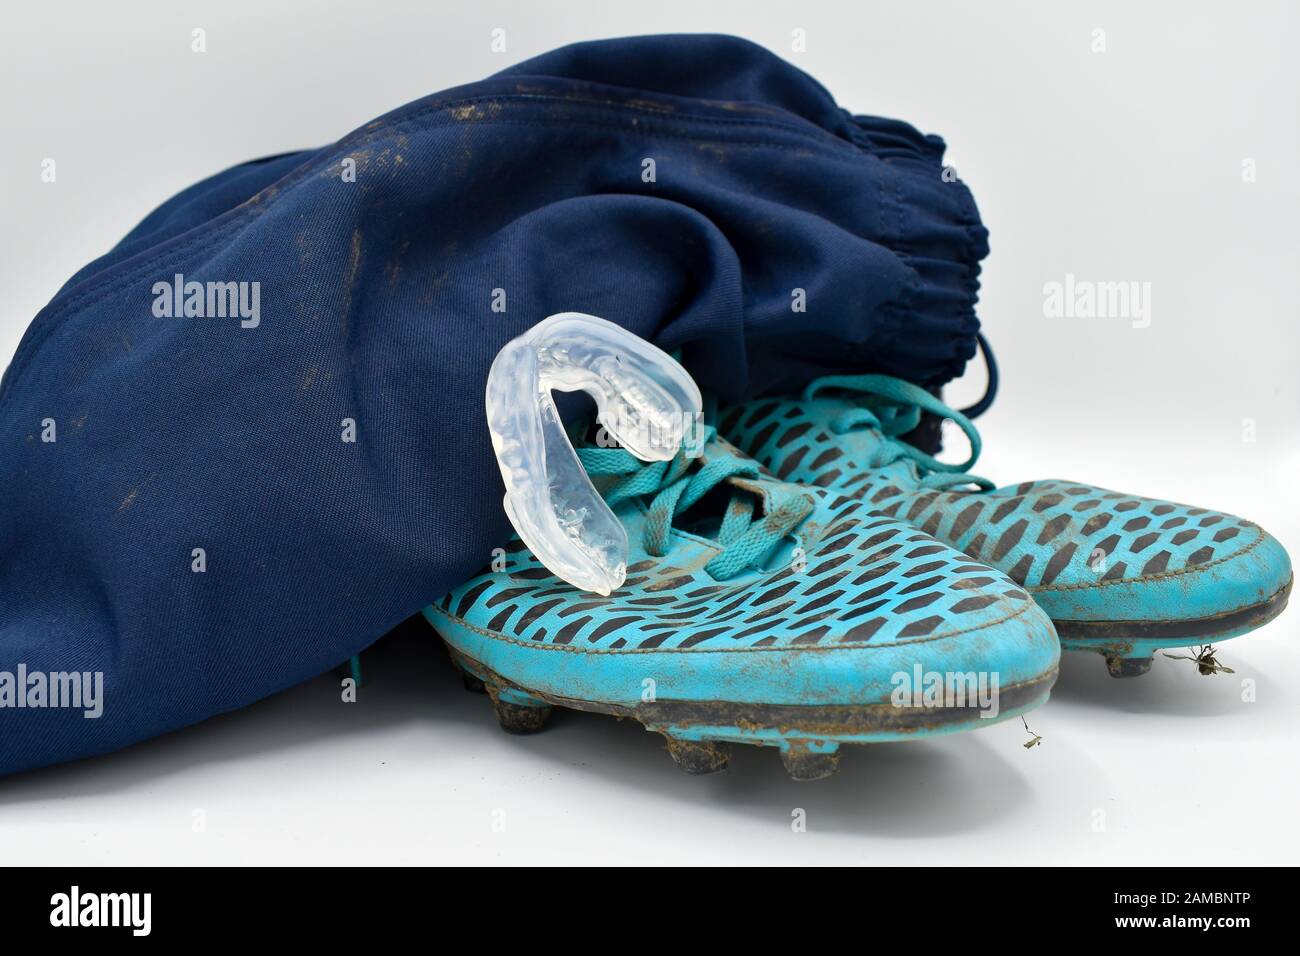 dirty rugby gear on a white background. Rugby boots, shorts and gumshield mouthguard Stock Photo